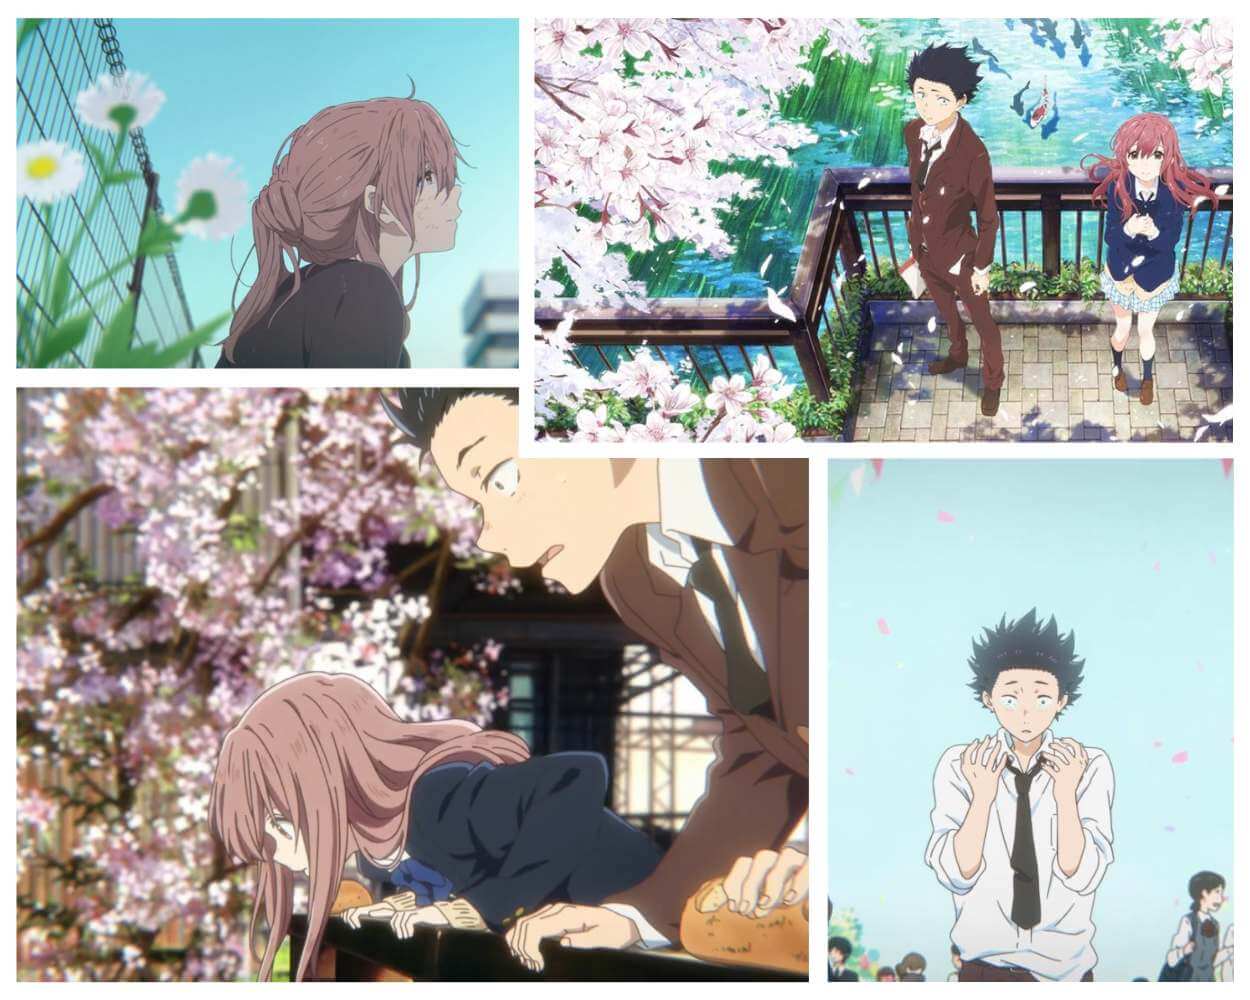 A Silent Voice's Animated Exploration of Social Anxiety